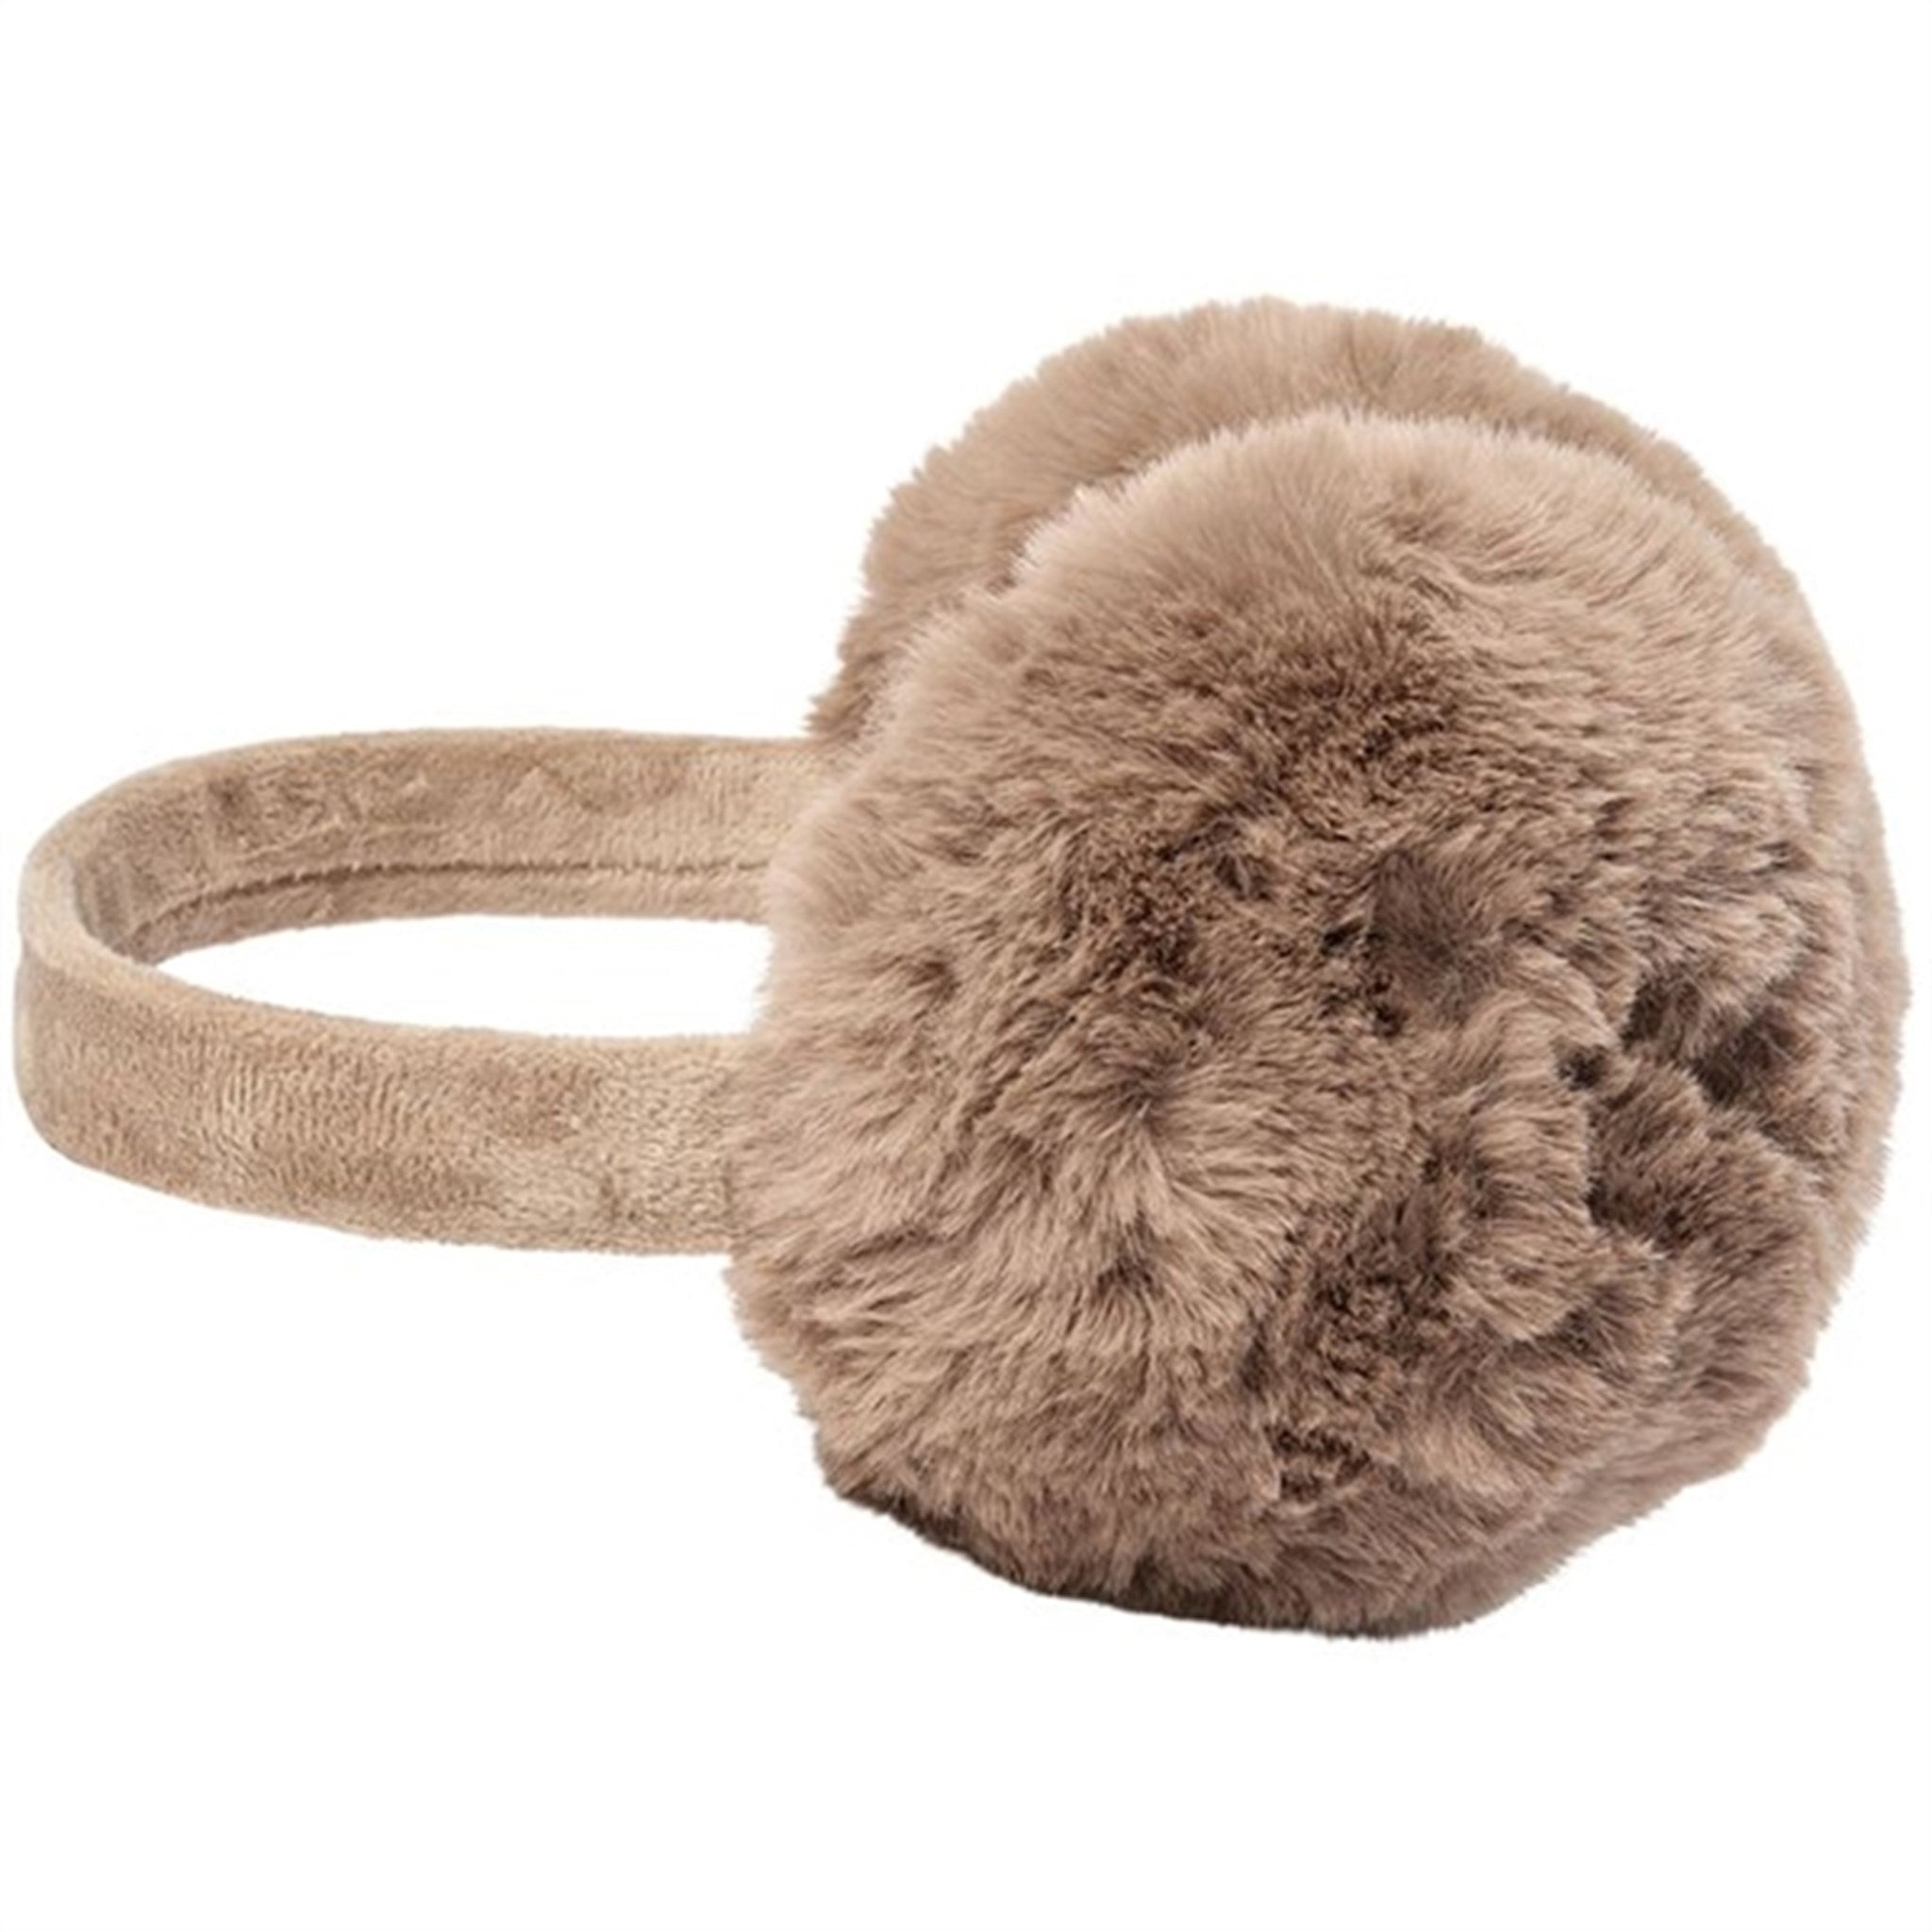 Sofie Schnoor Young Camel Earmuffs 2